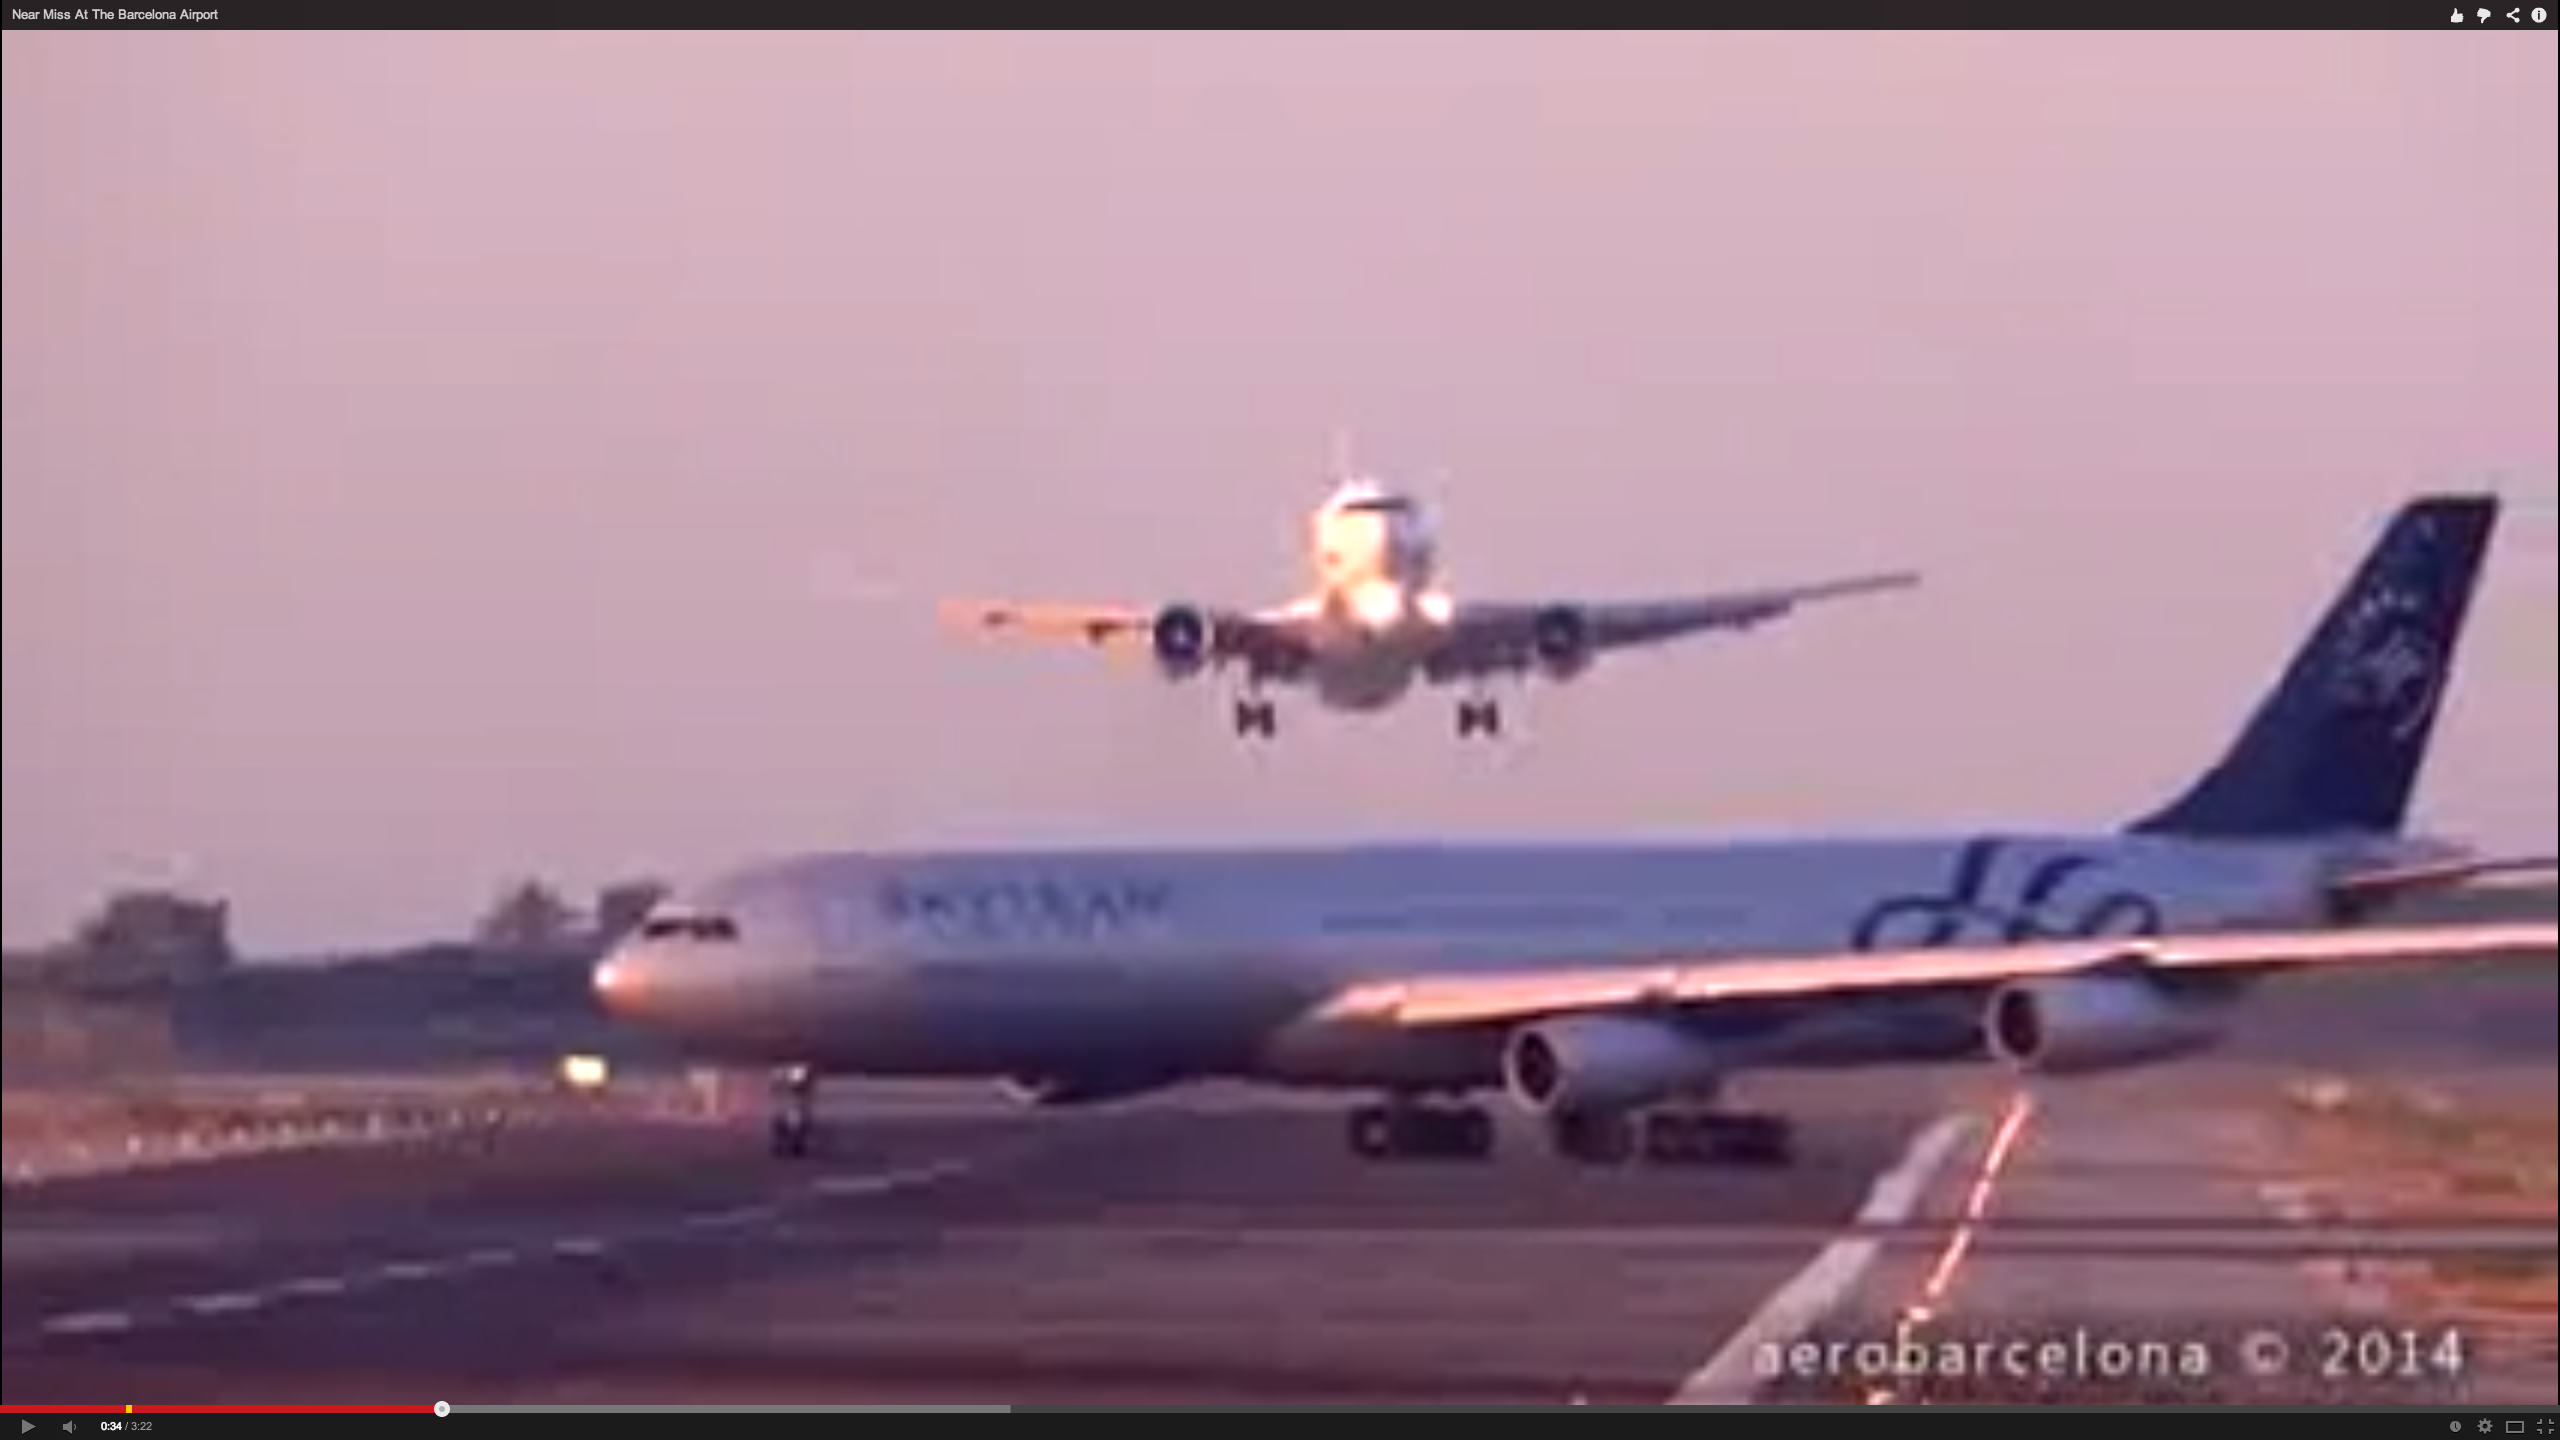 The moment the two planes came close to colliding at Barcelona Airport